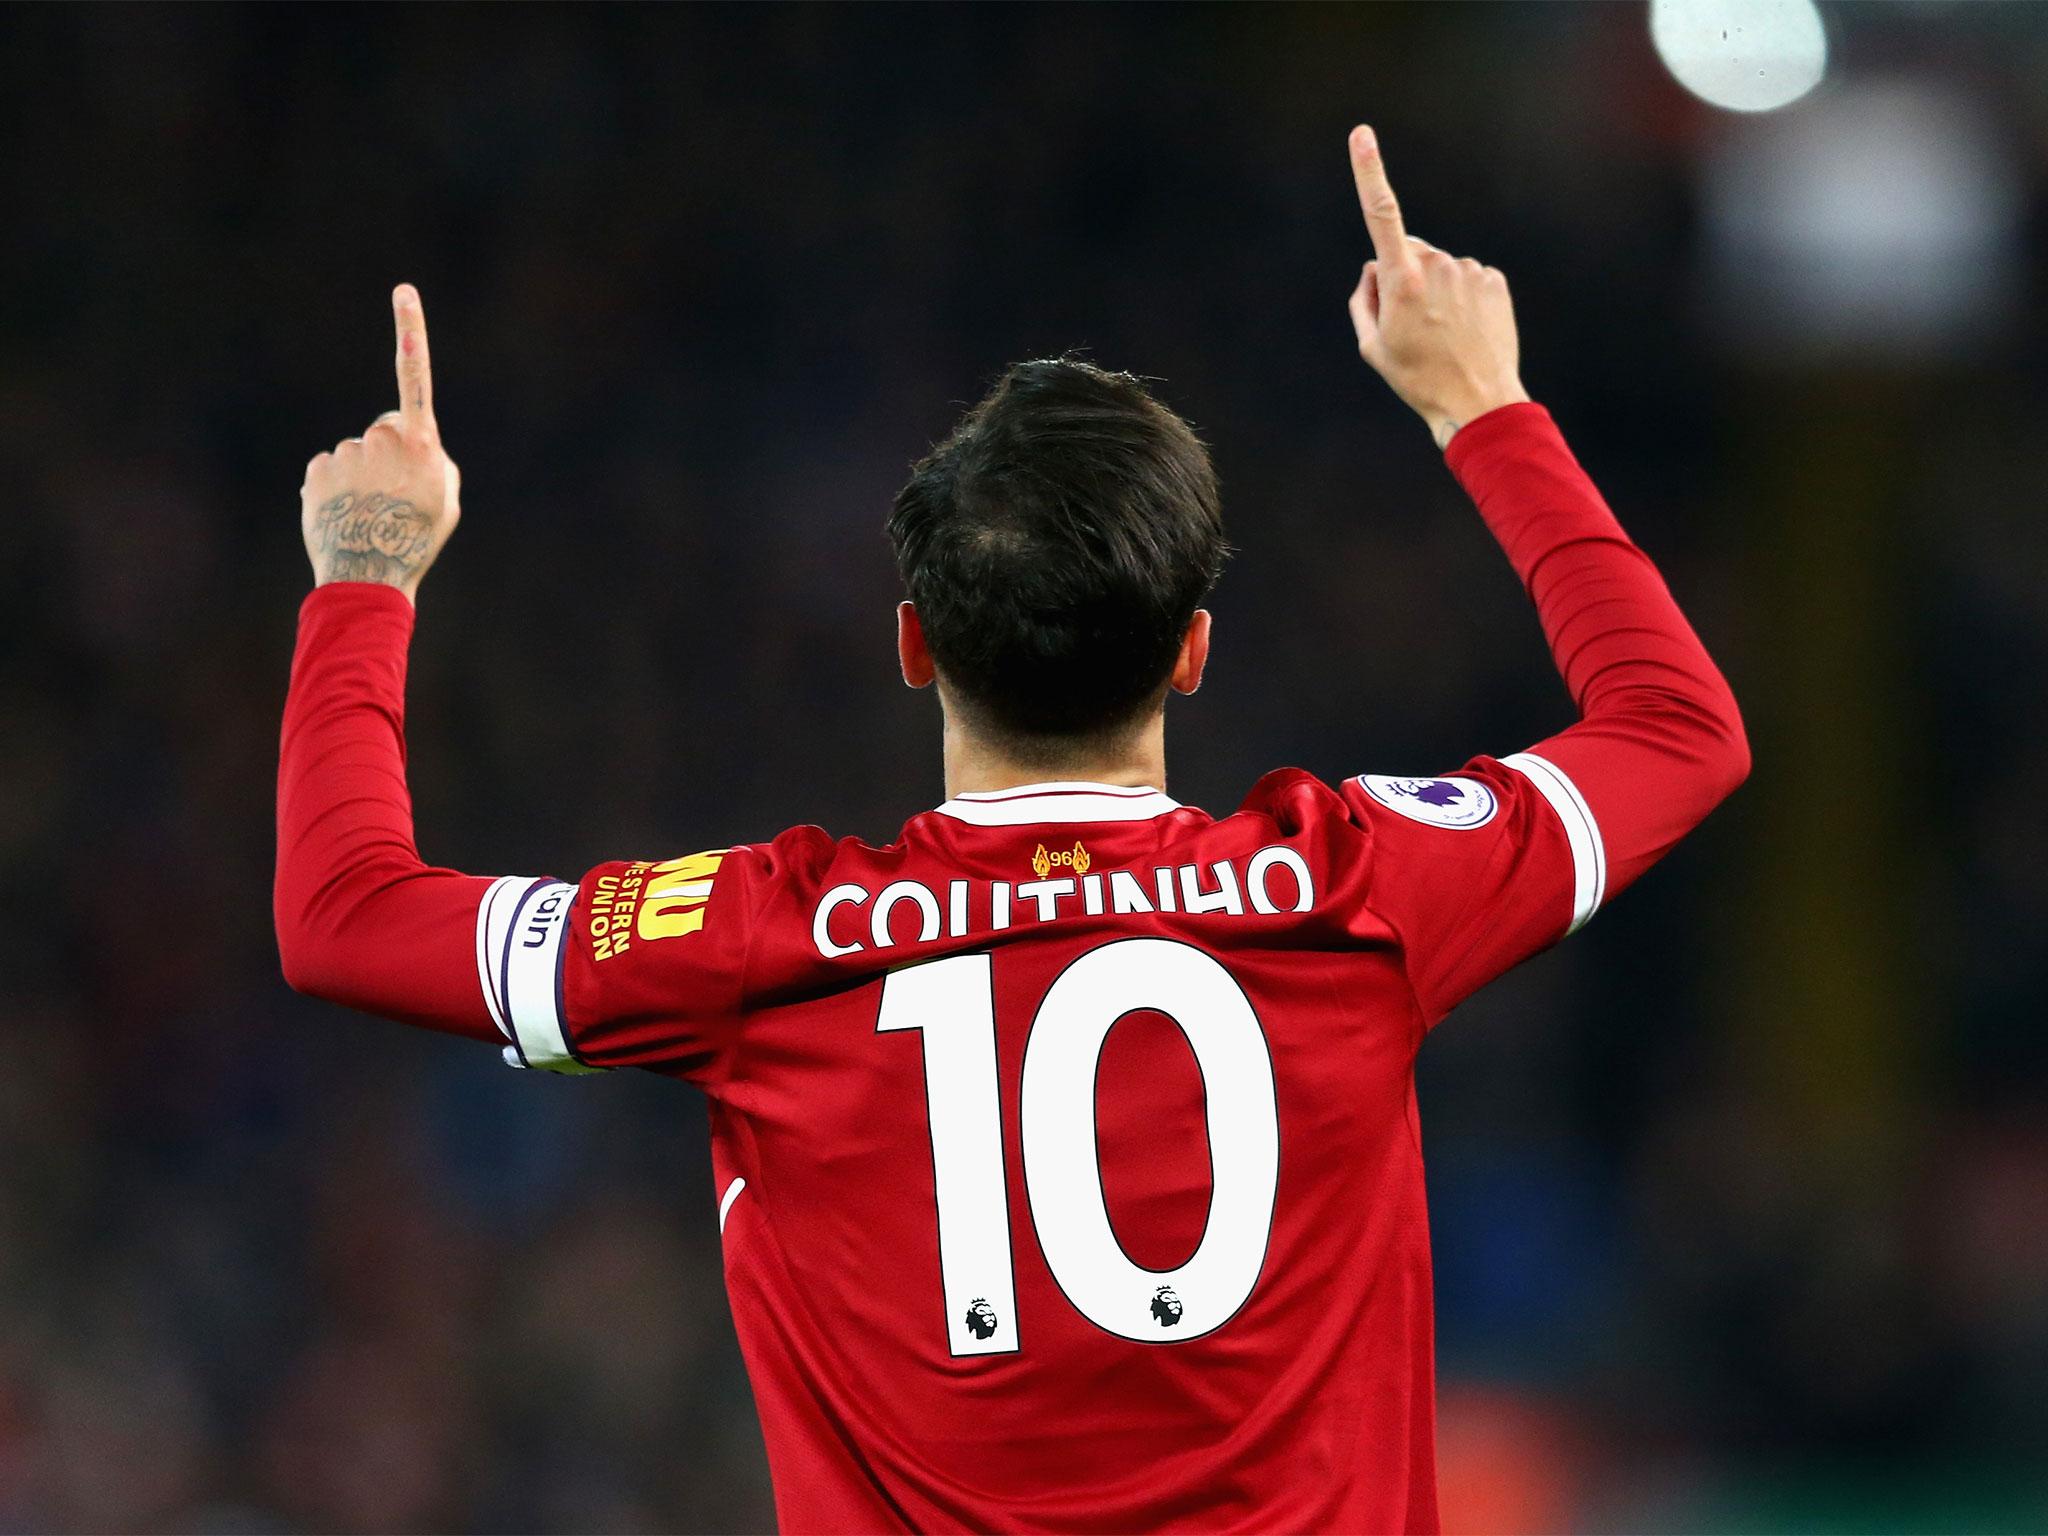 Coutinho could be rested for the trip to Turf Moor